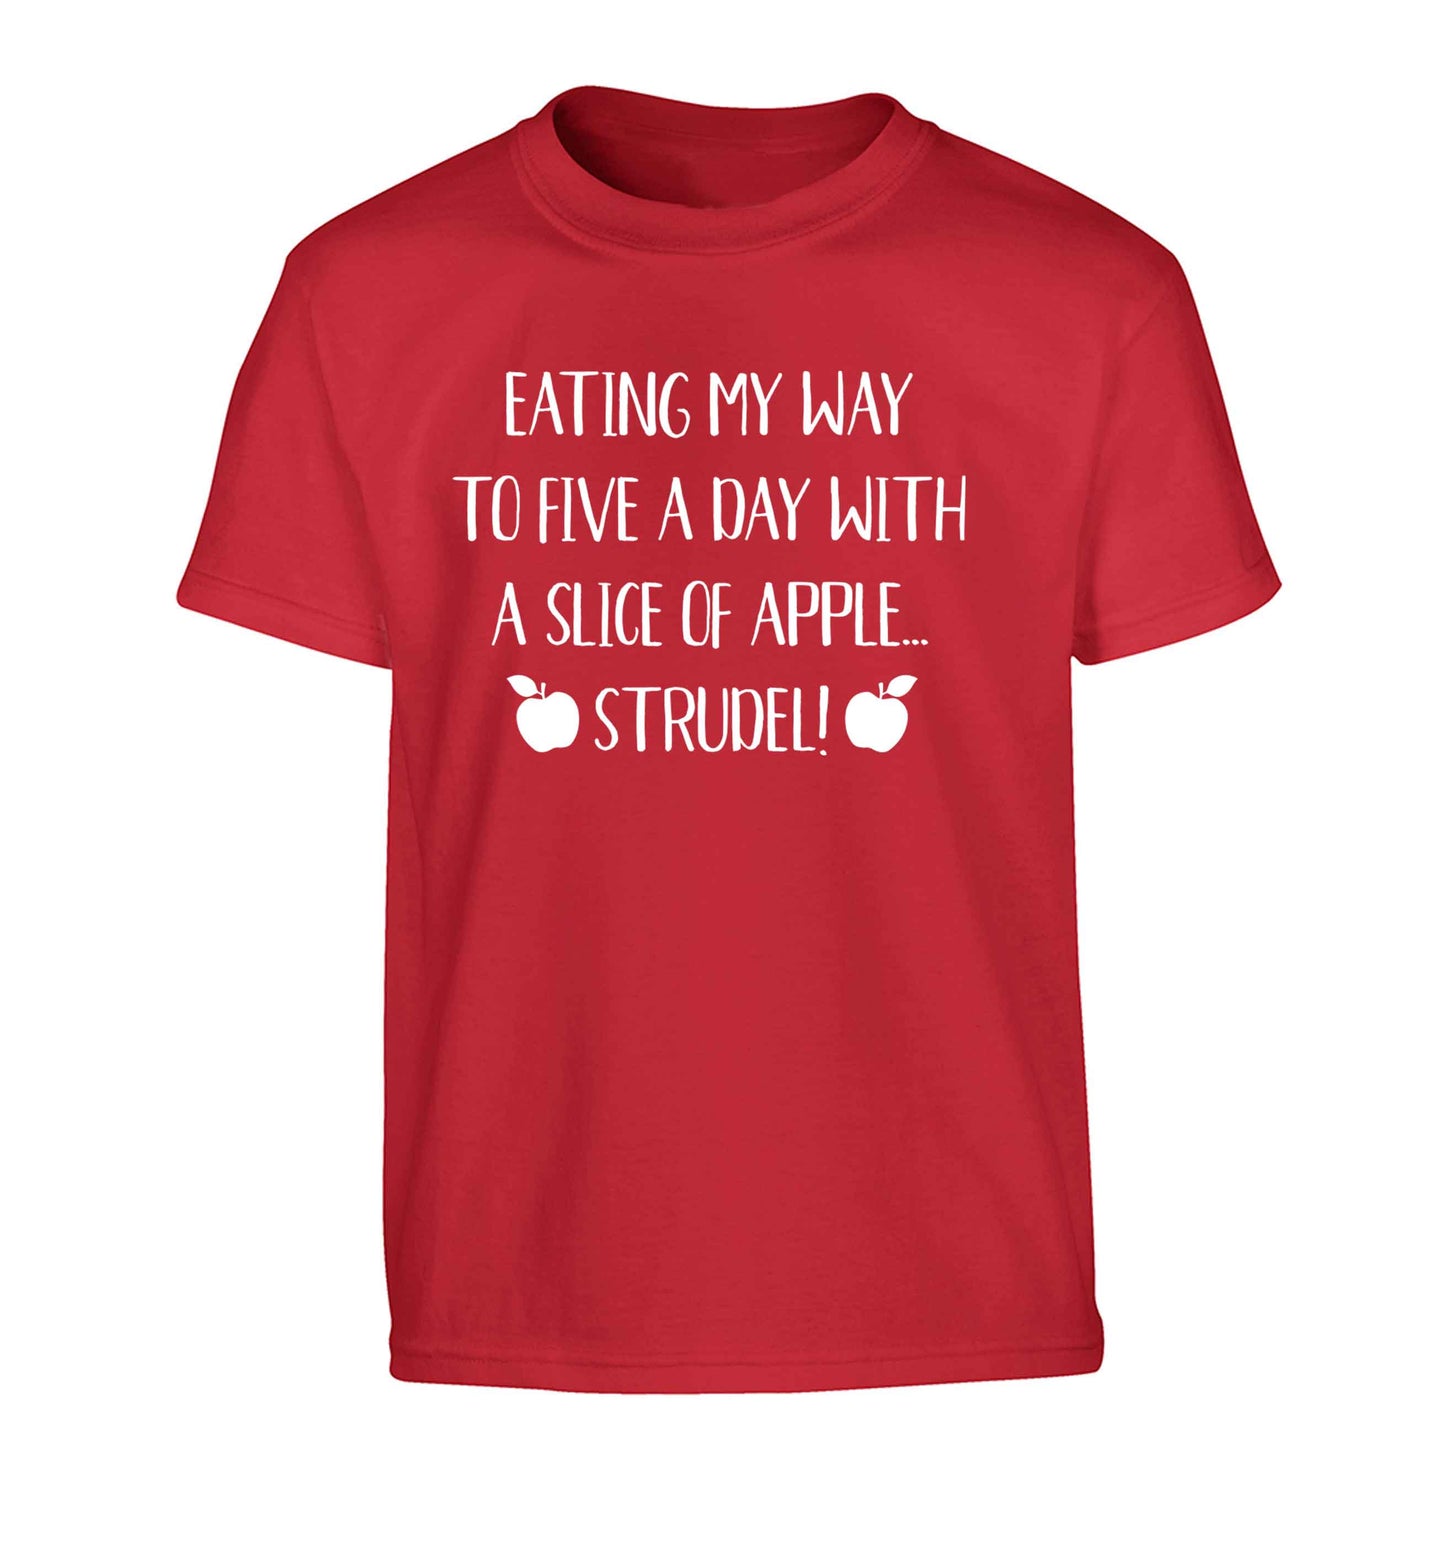 Eating my way to five a day with a slice of apple strudel Children's red Tshirt 12-13 Years